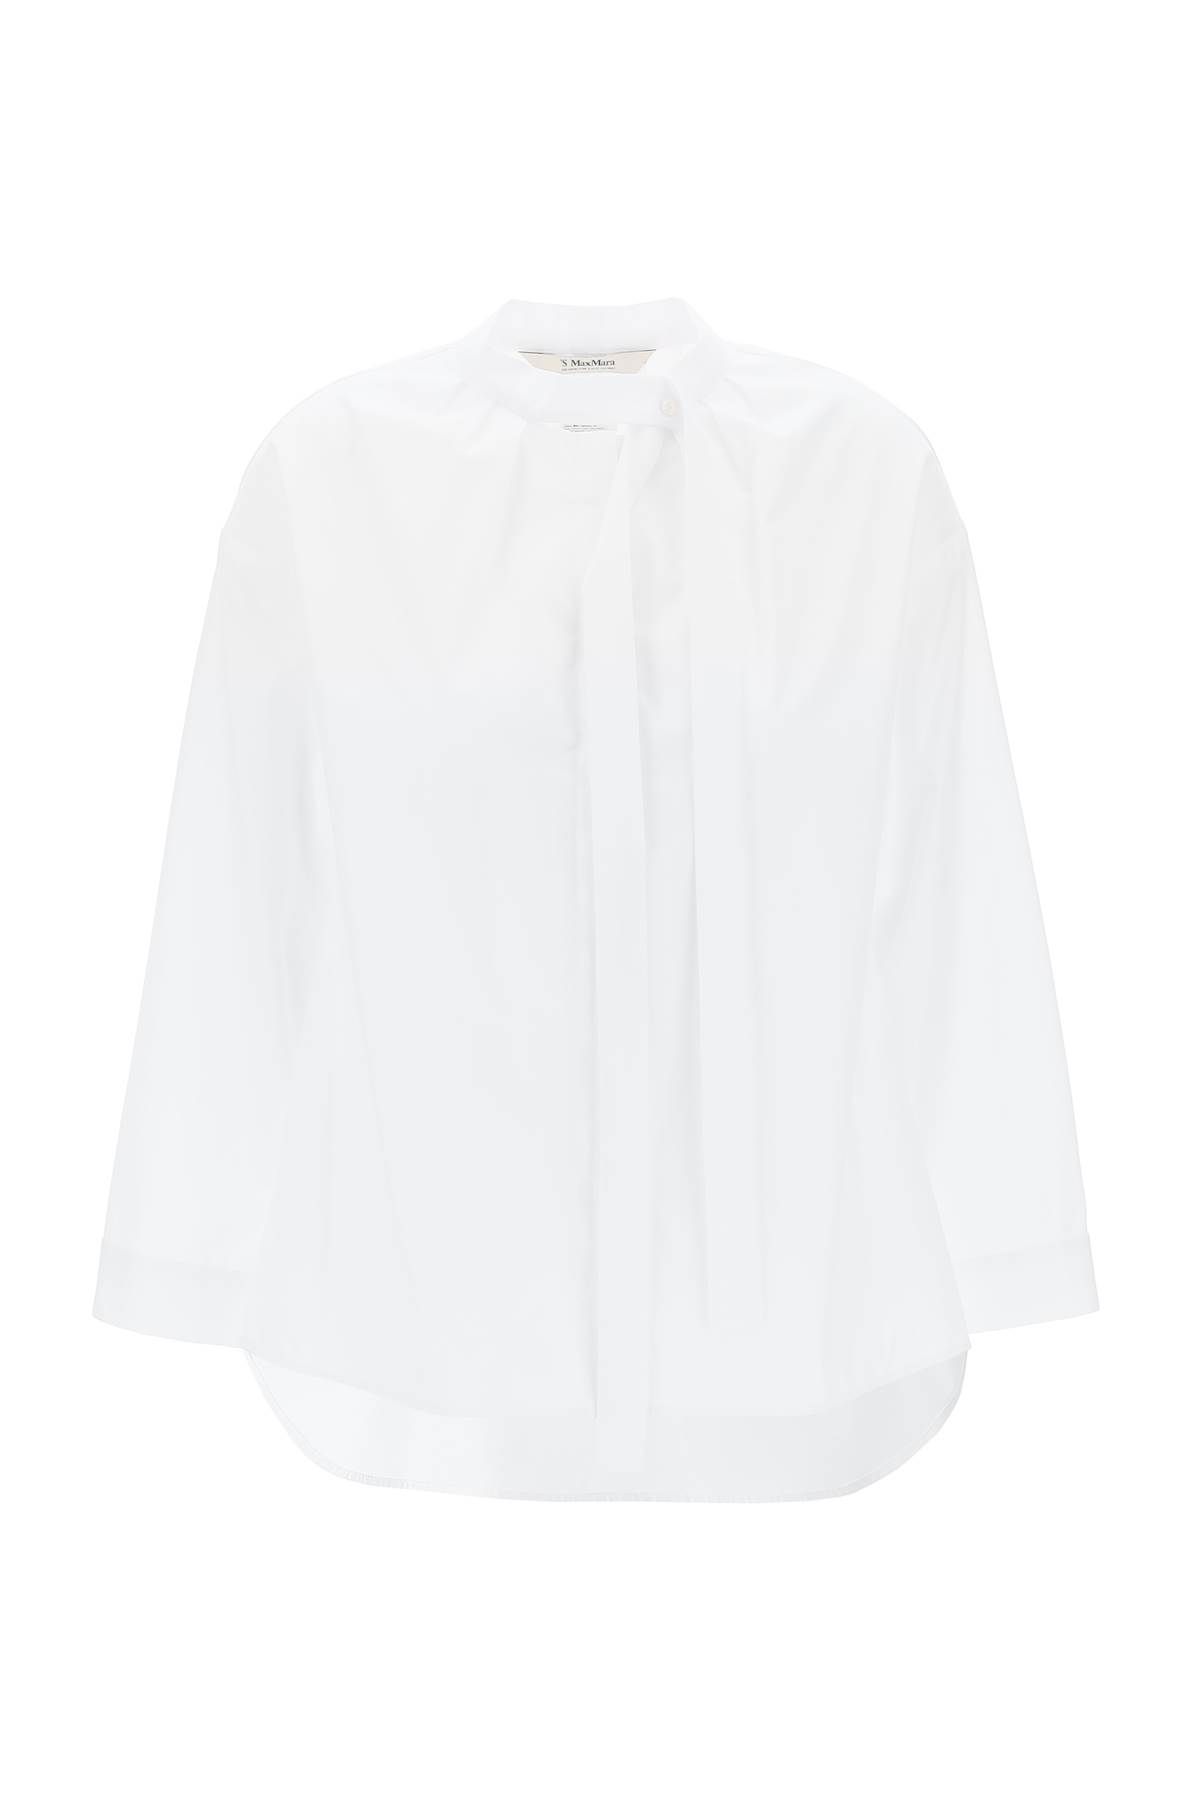 's Max Mara Filippa Blouse With Bow In White